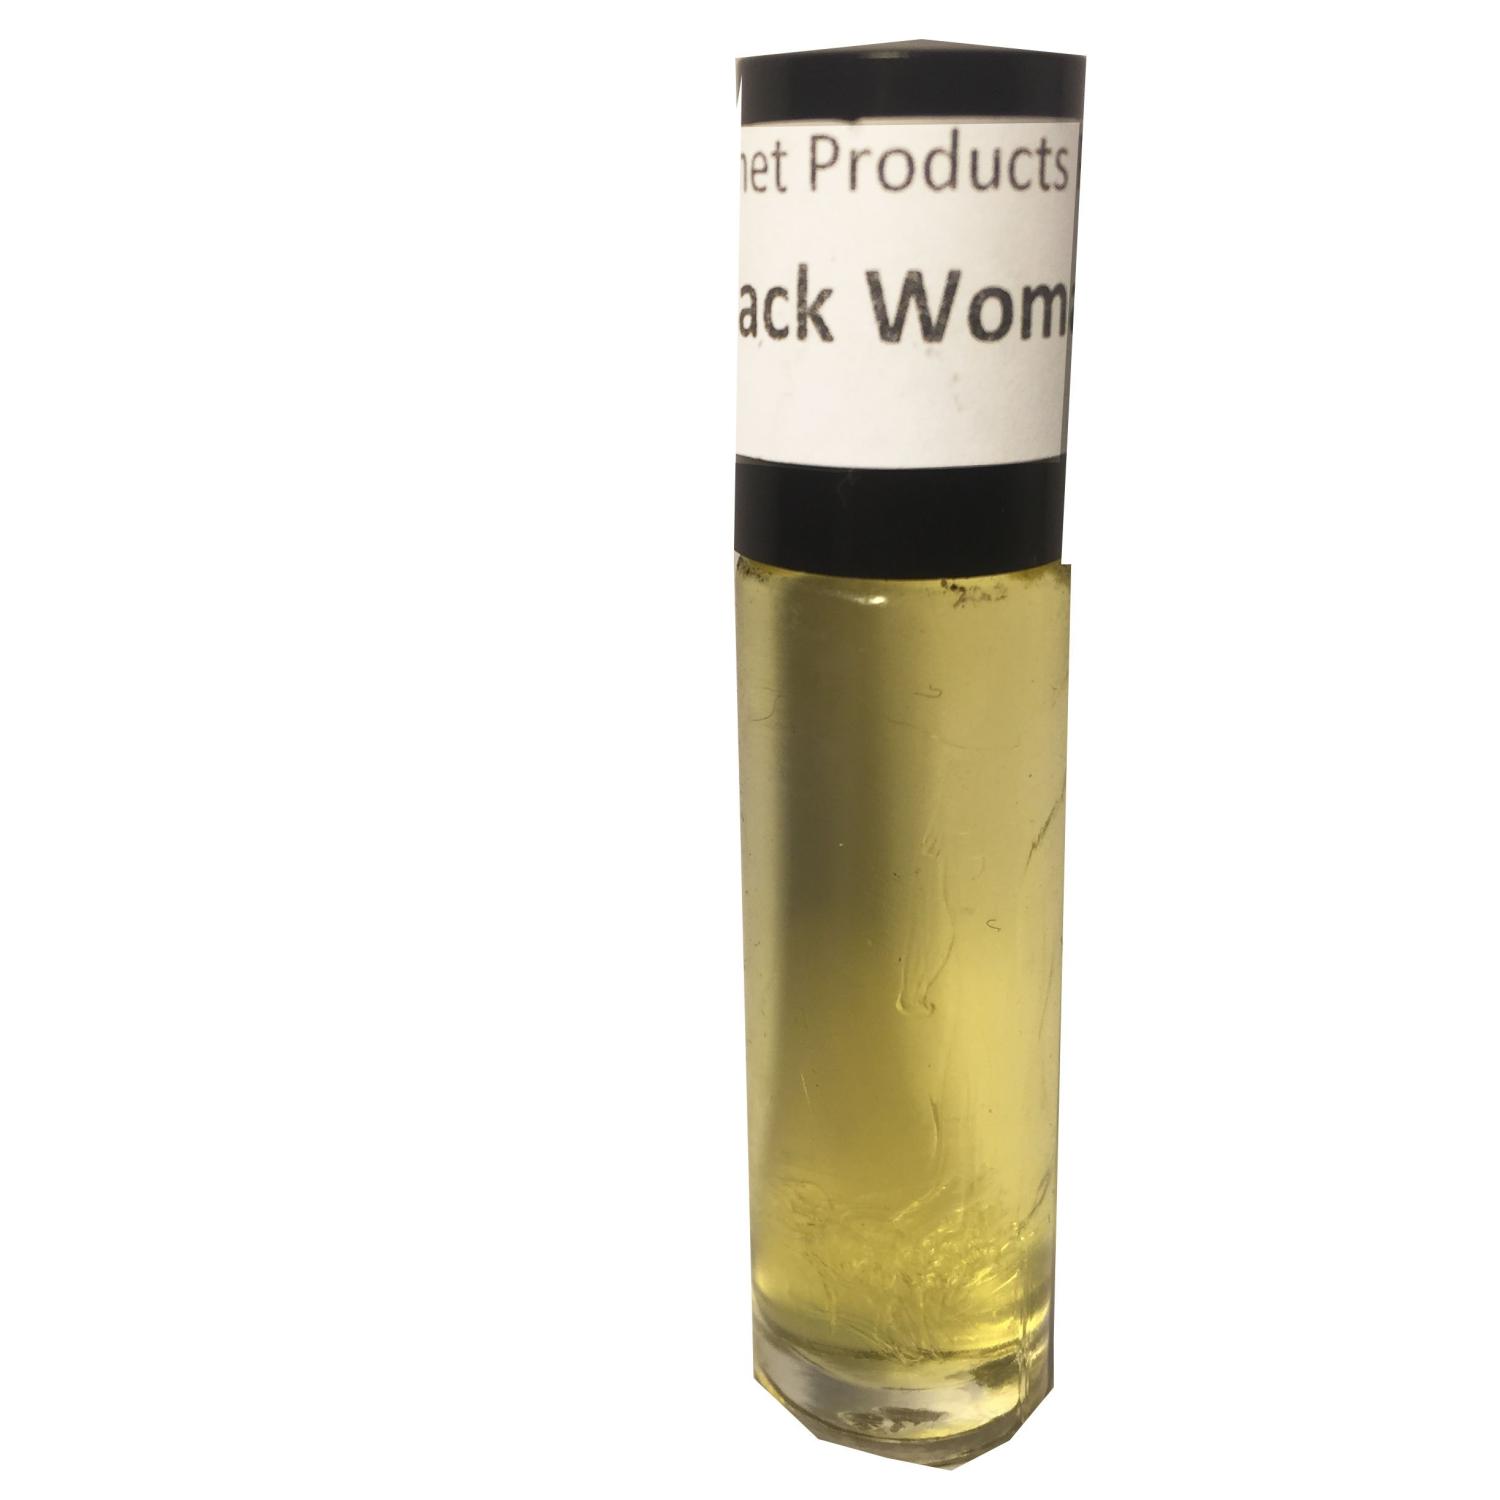 PLANET PRODUCTS PLUS - Black Woman (W) Roll on Body Oil Perfume Fragrance